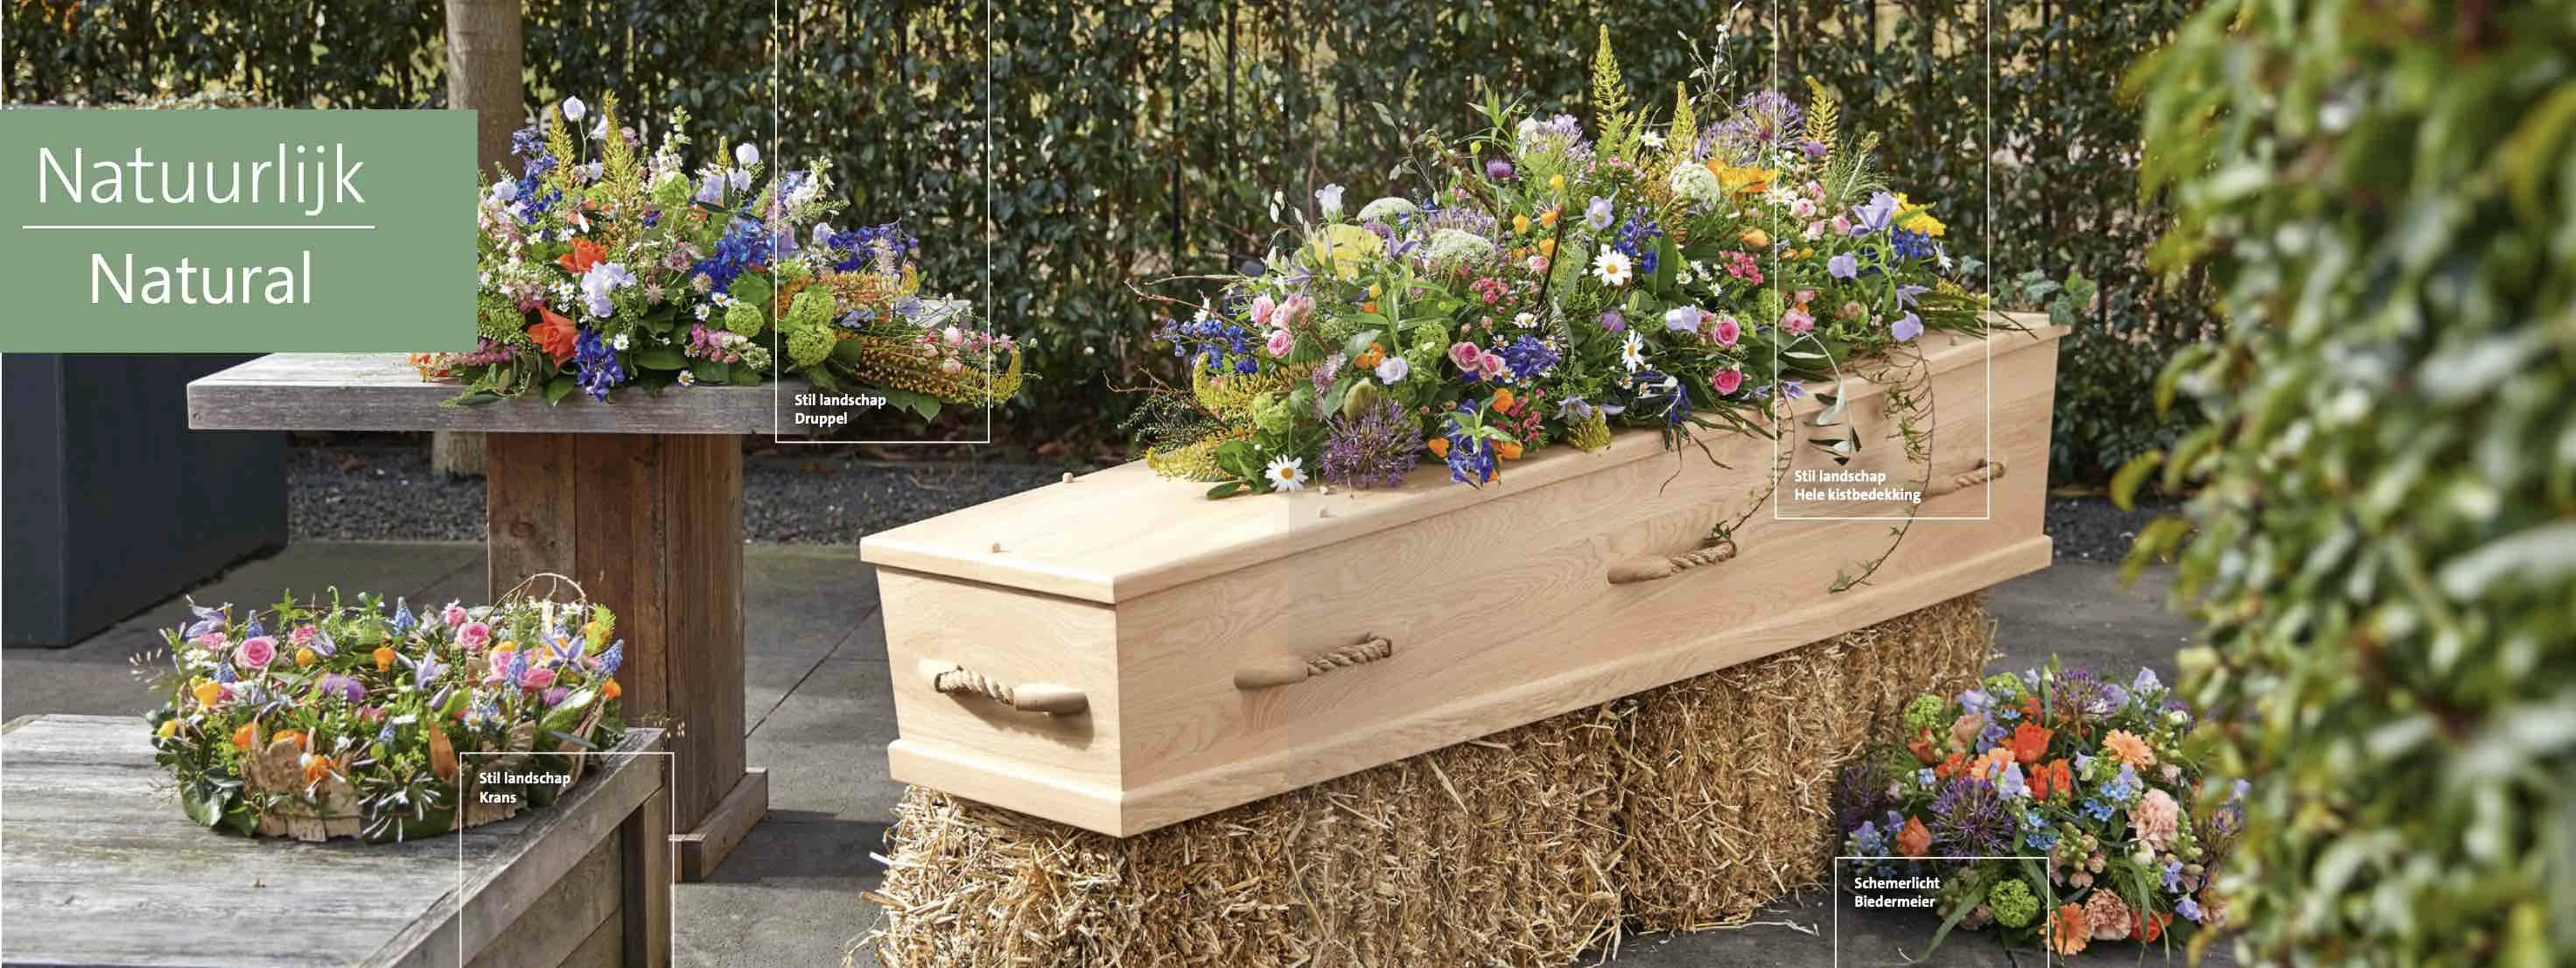 Natural funeral Flowers